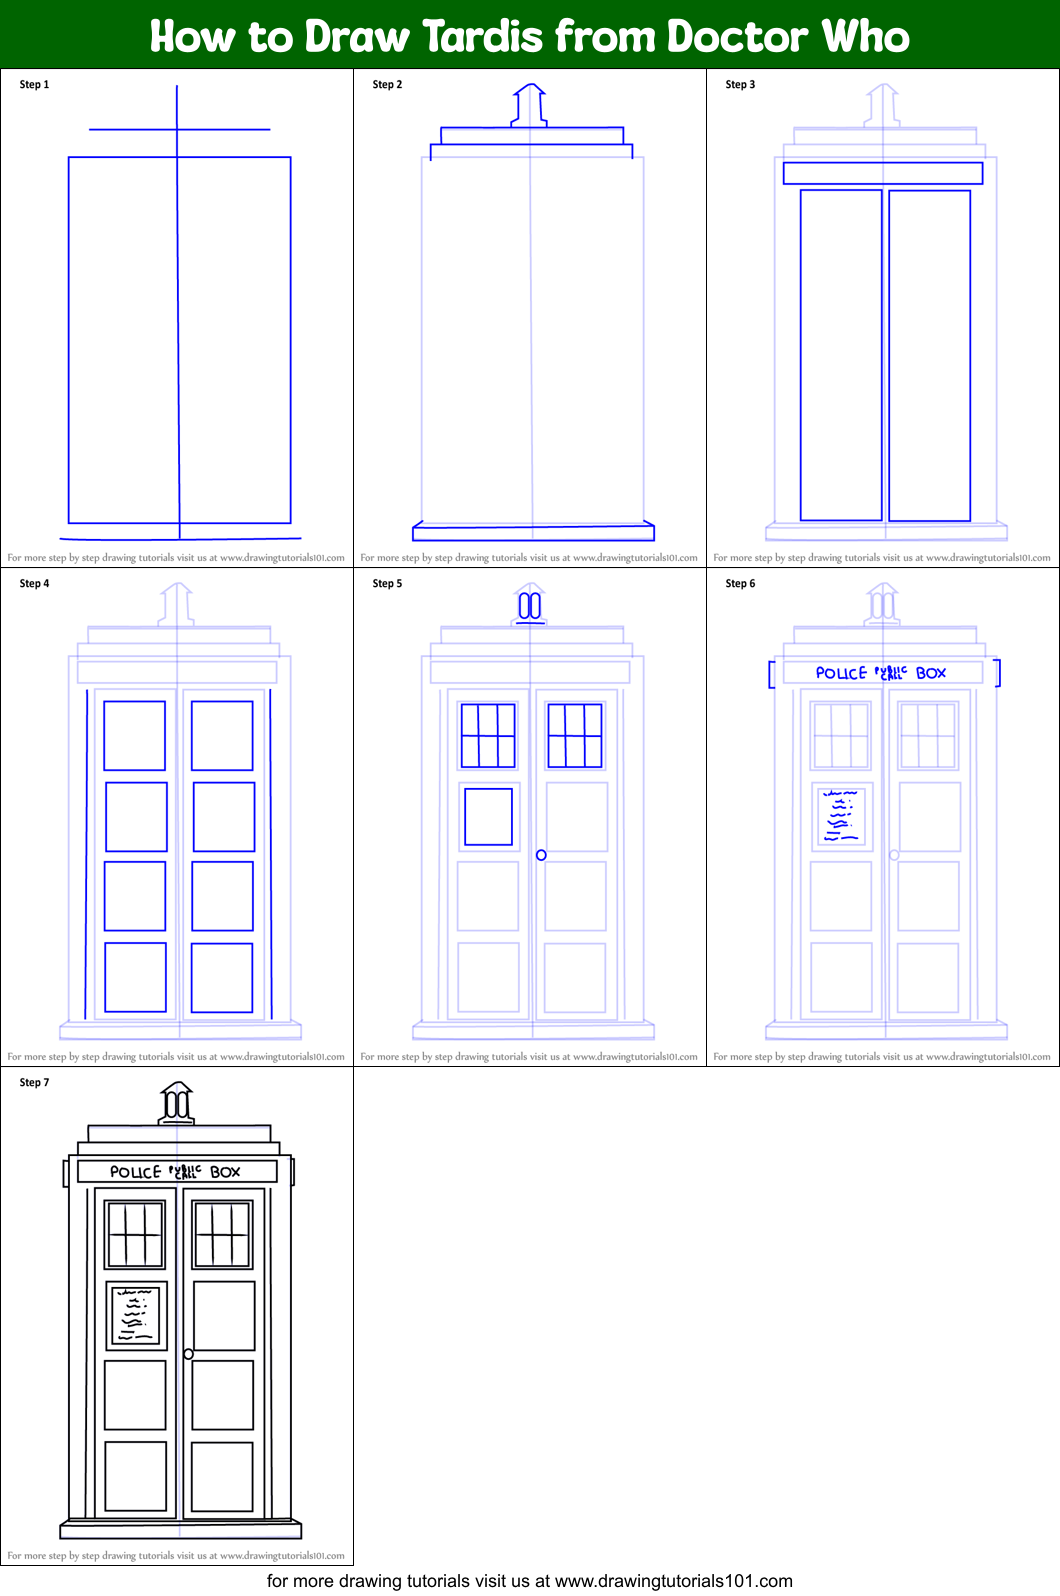 How to Draw Tardis from Doctor Who printable step by step drawing sheet